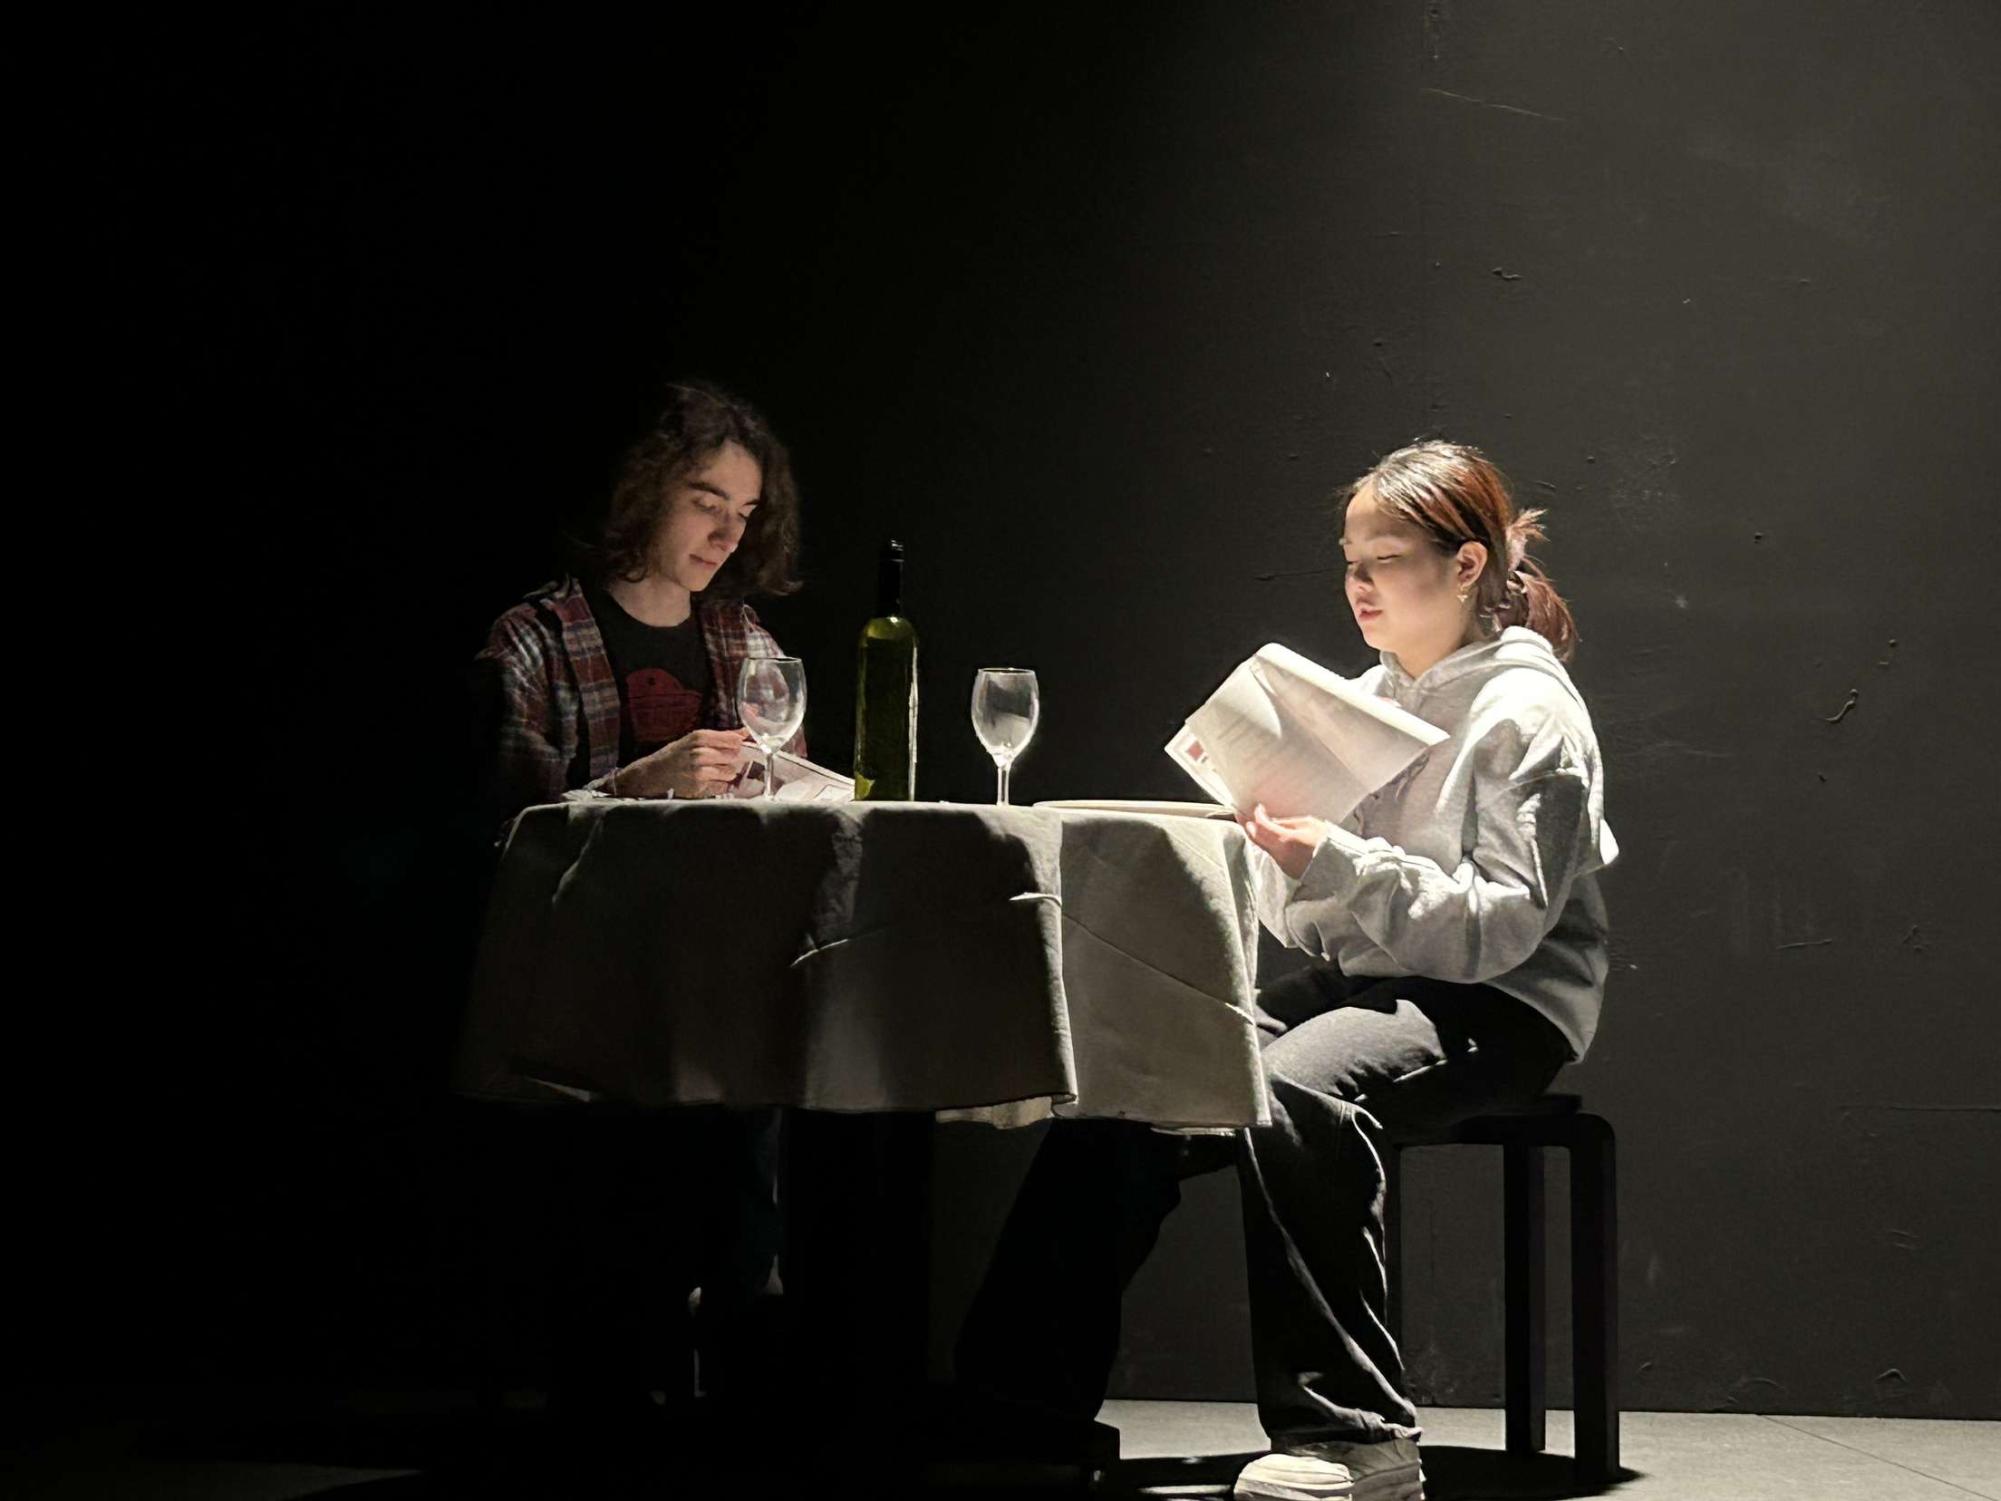 Juniors Sam ONeill (left) and Sopheen Lee (right) rehearsing in the Black Box Theater